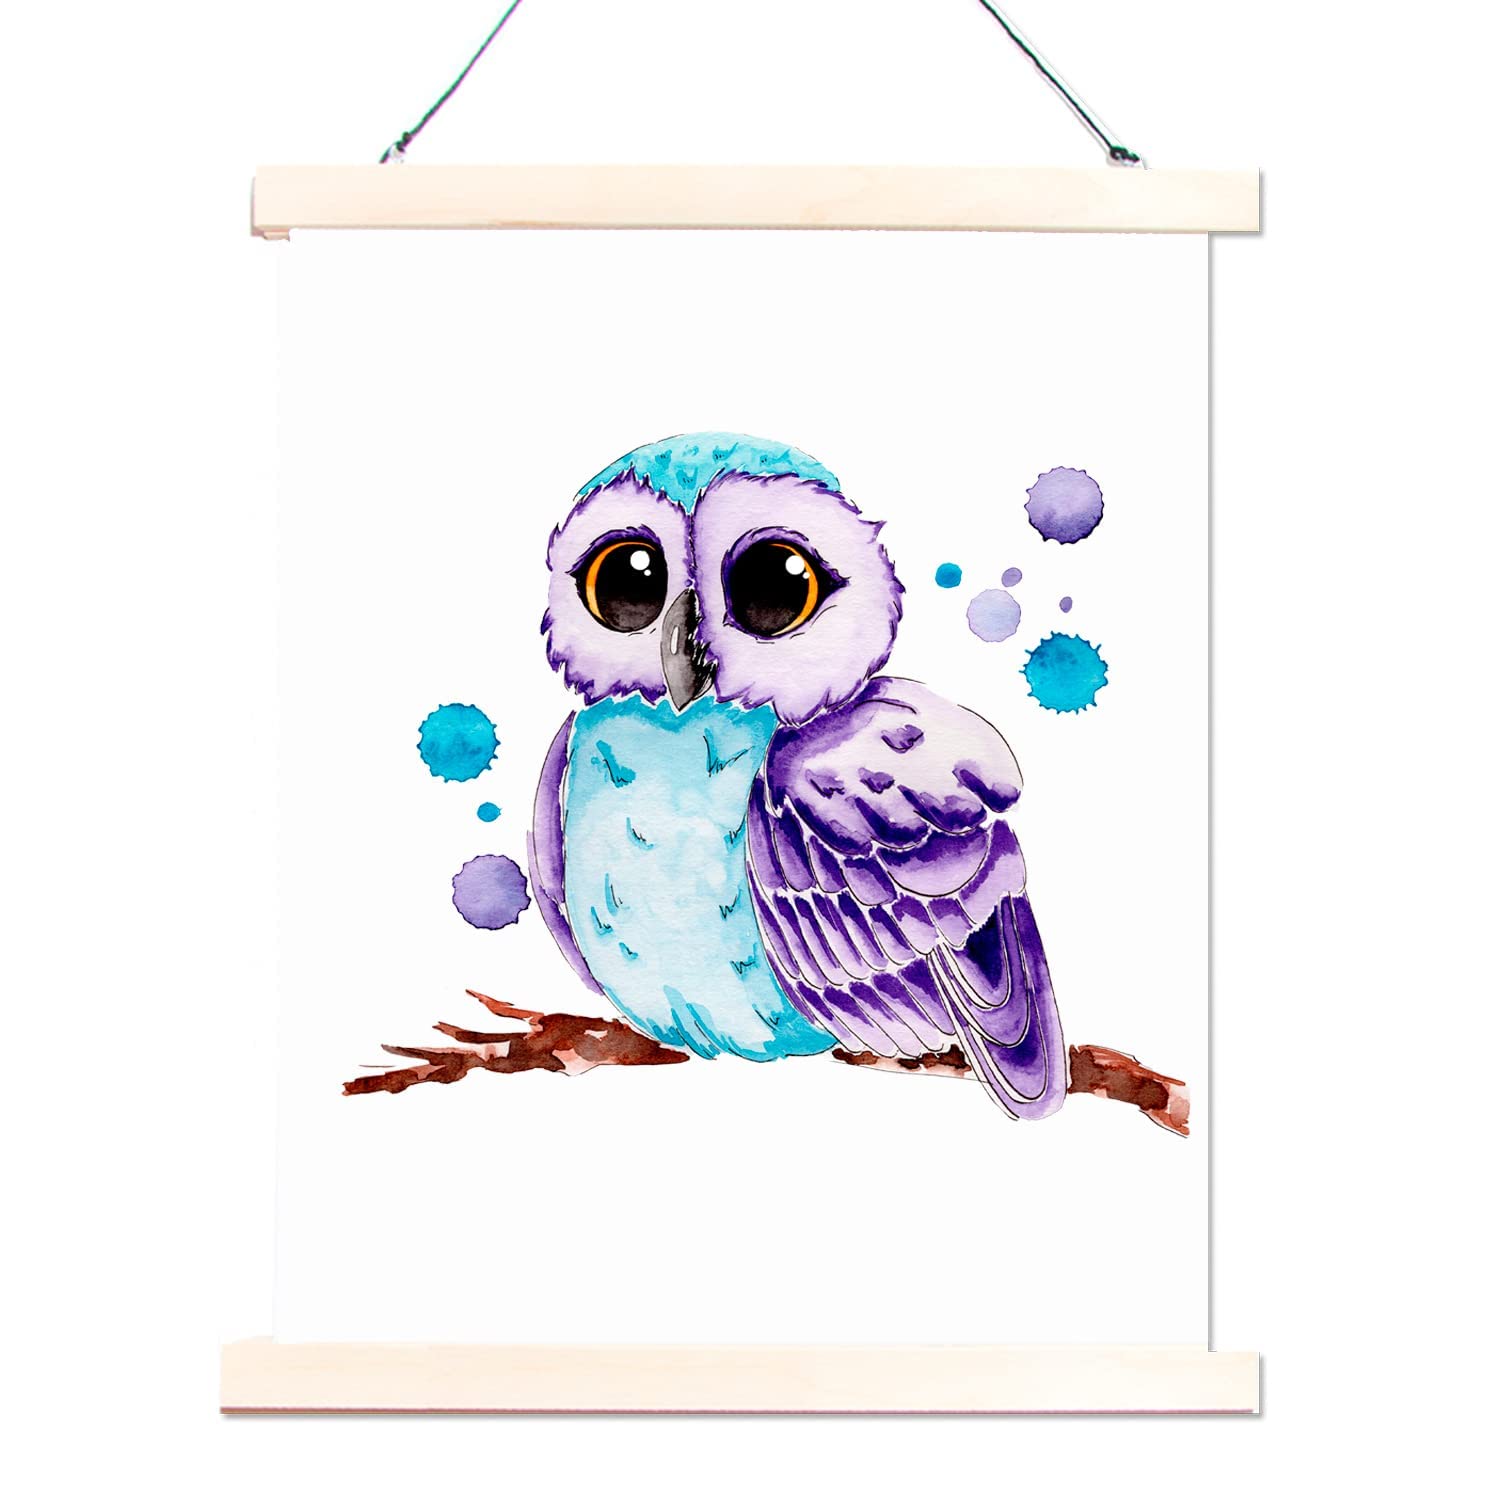 Baby Owl Wall Art Print by Pop Pigments. Kids Wall [...]